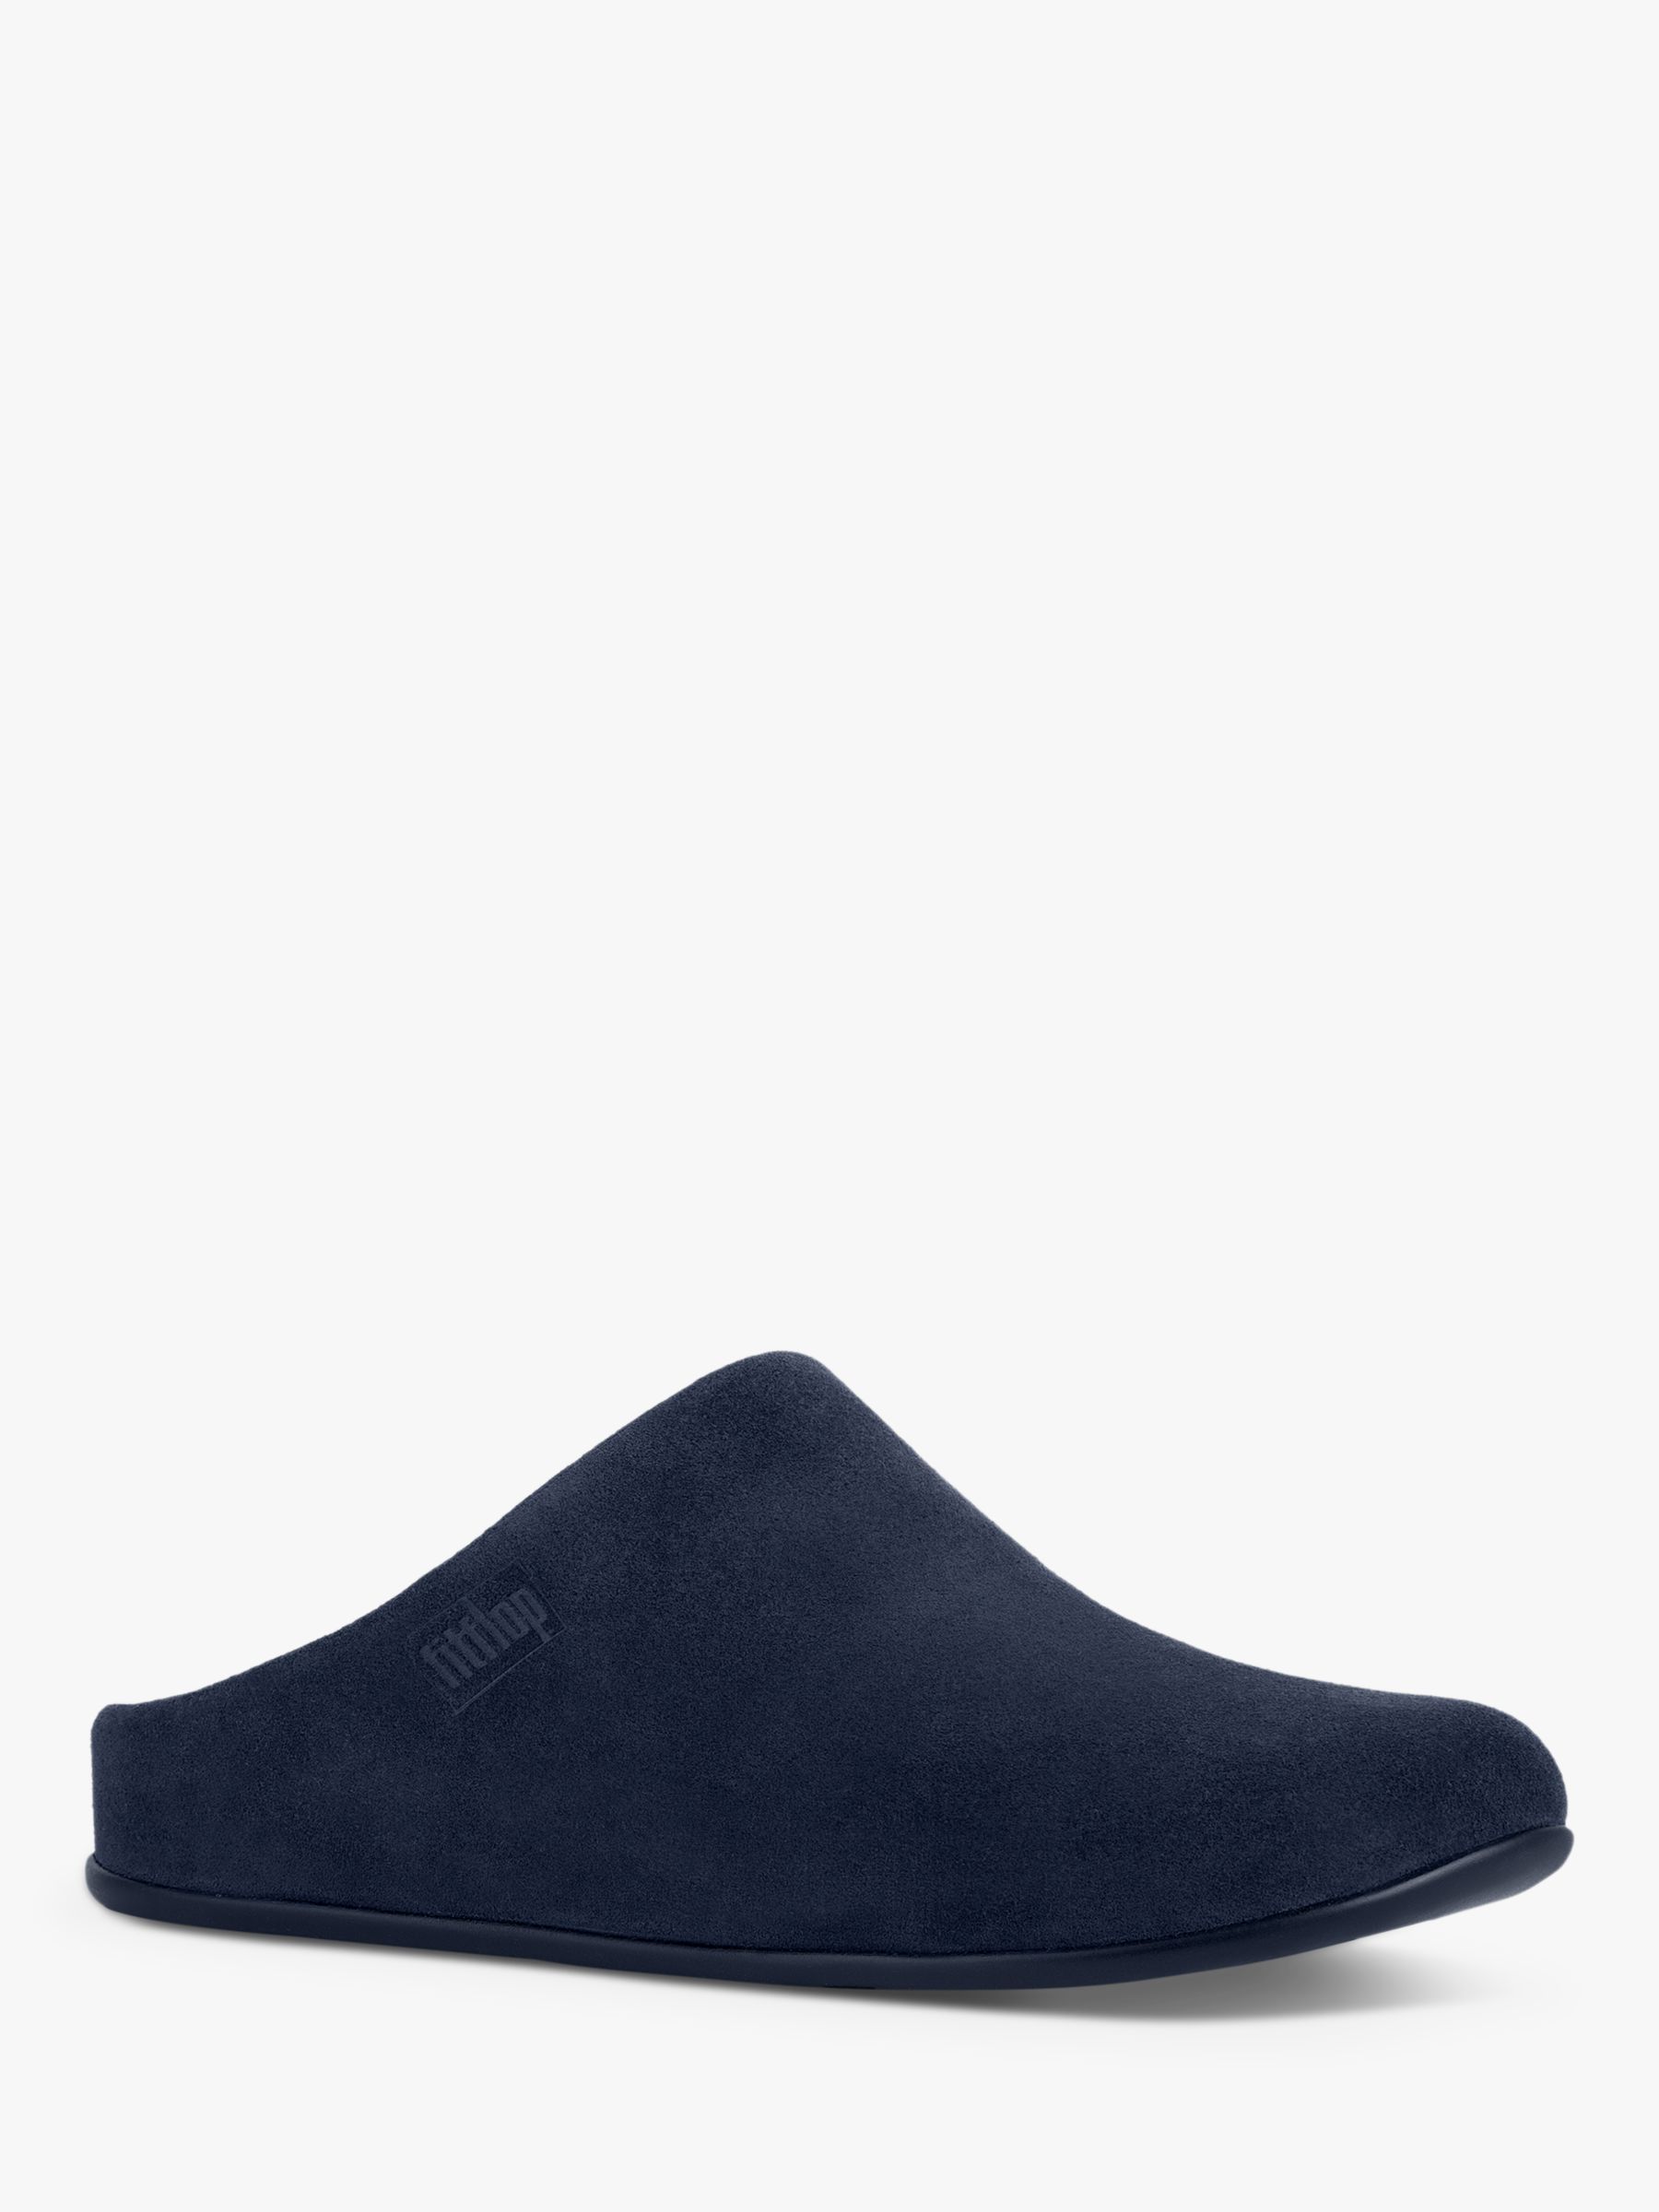 FitFlop Chrissie Shearling Lined Suede Slippers, Navy at John Lewis ...